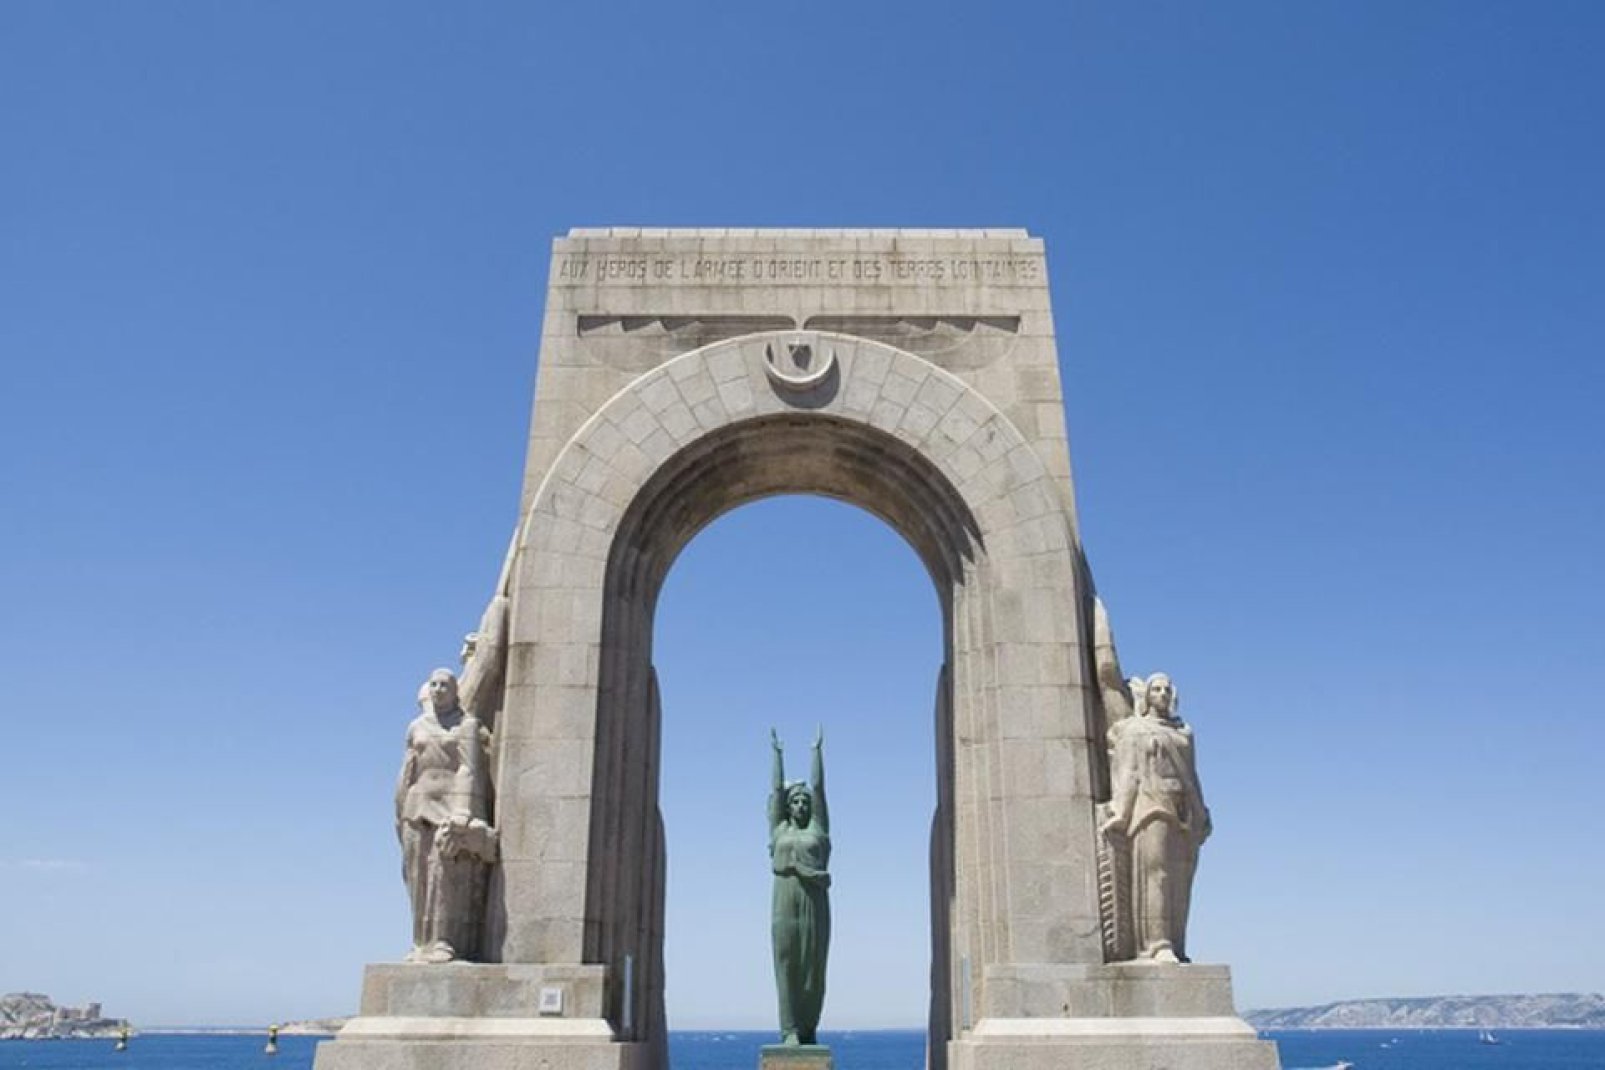 This building was built as a tribute to the soldiers of North Africa, and looks over the Mediterranean.